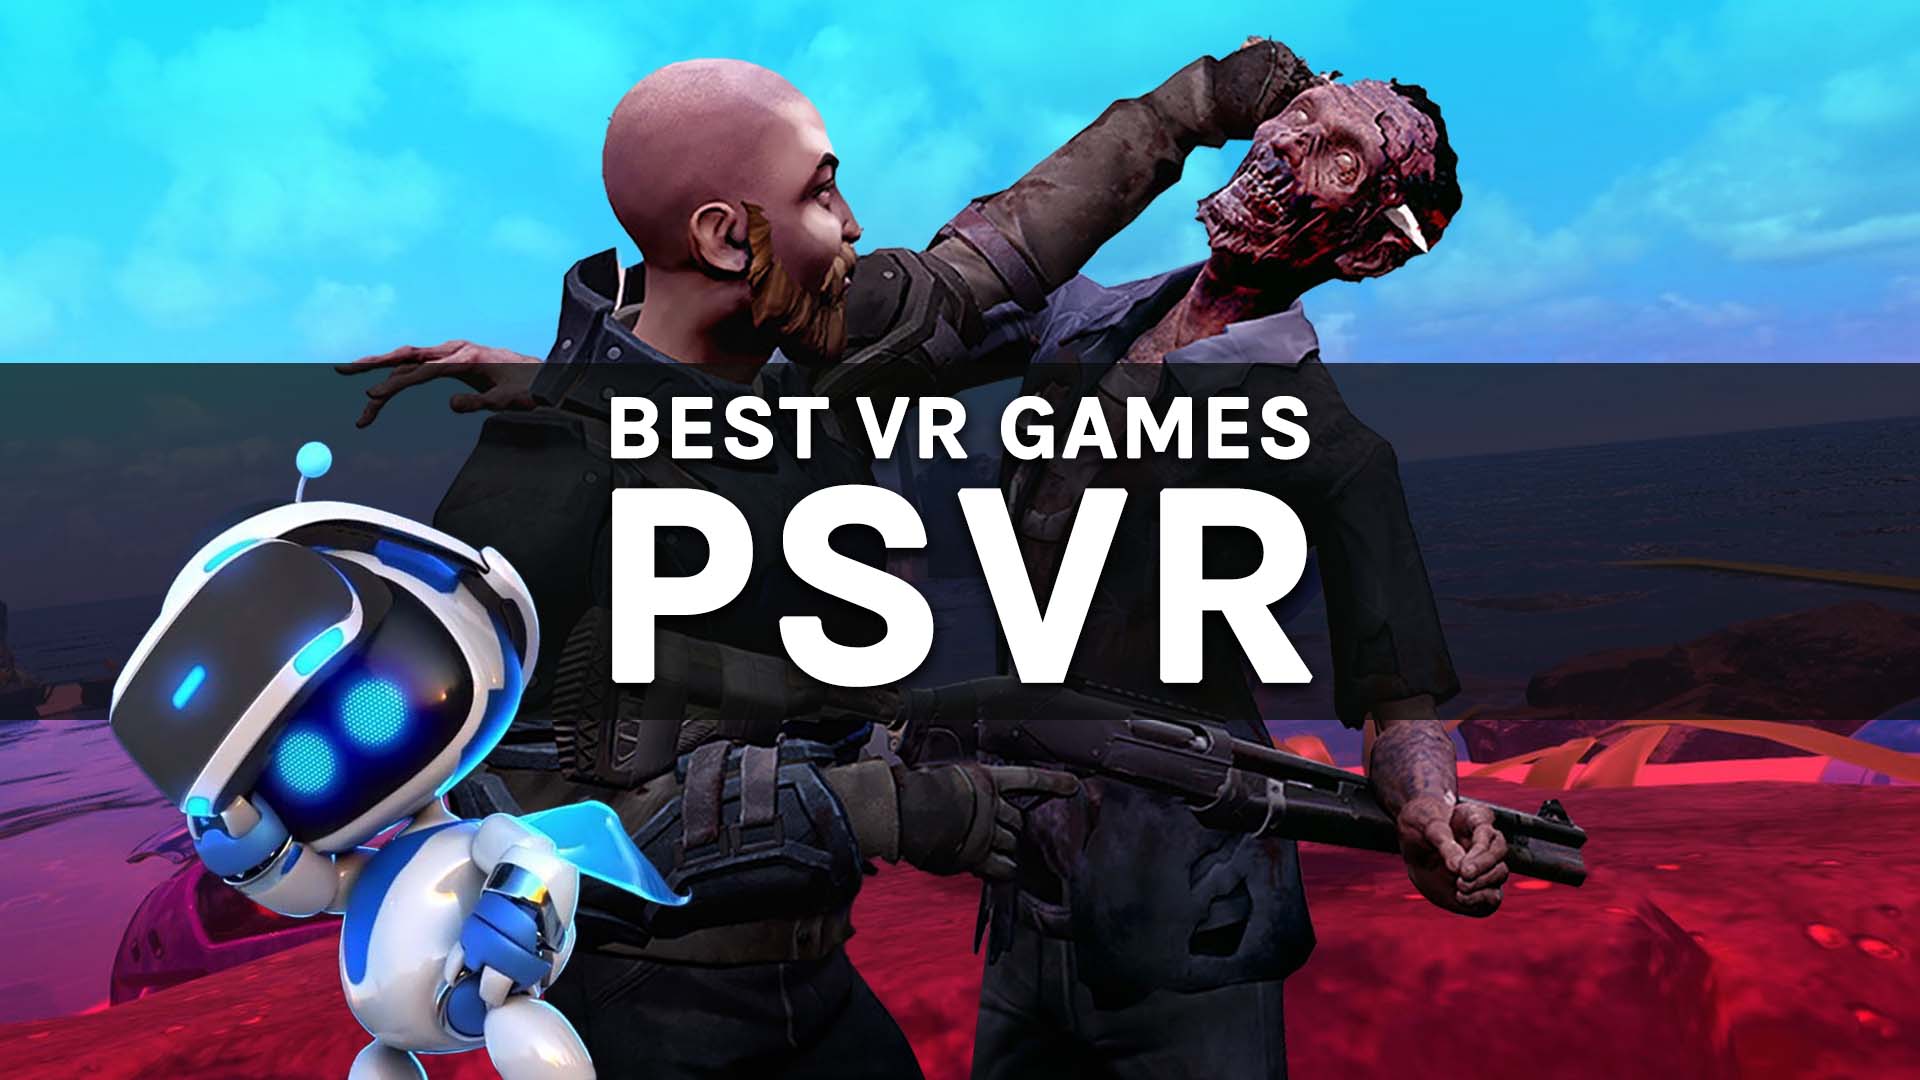 The best VR games: What are the best PSVR, Oculus and other VR games?